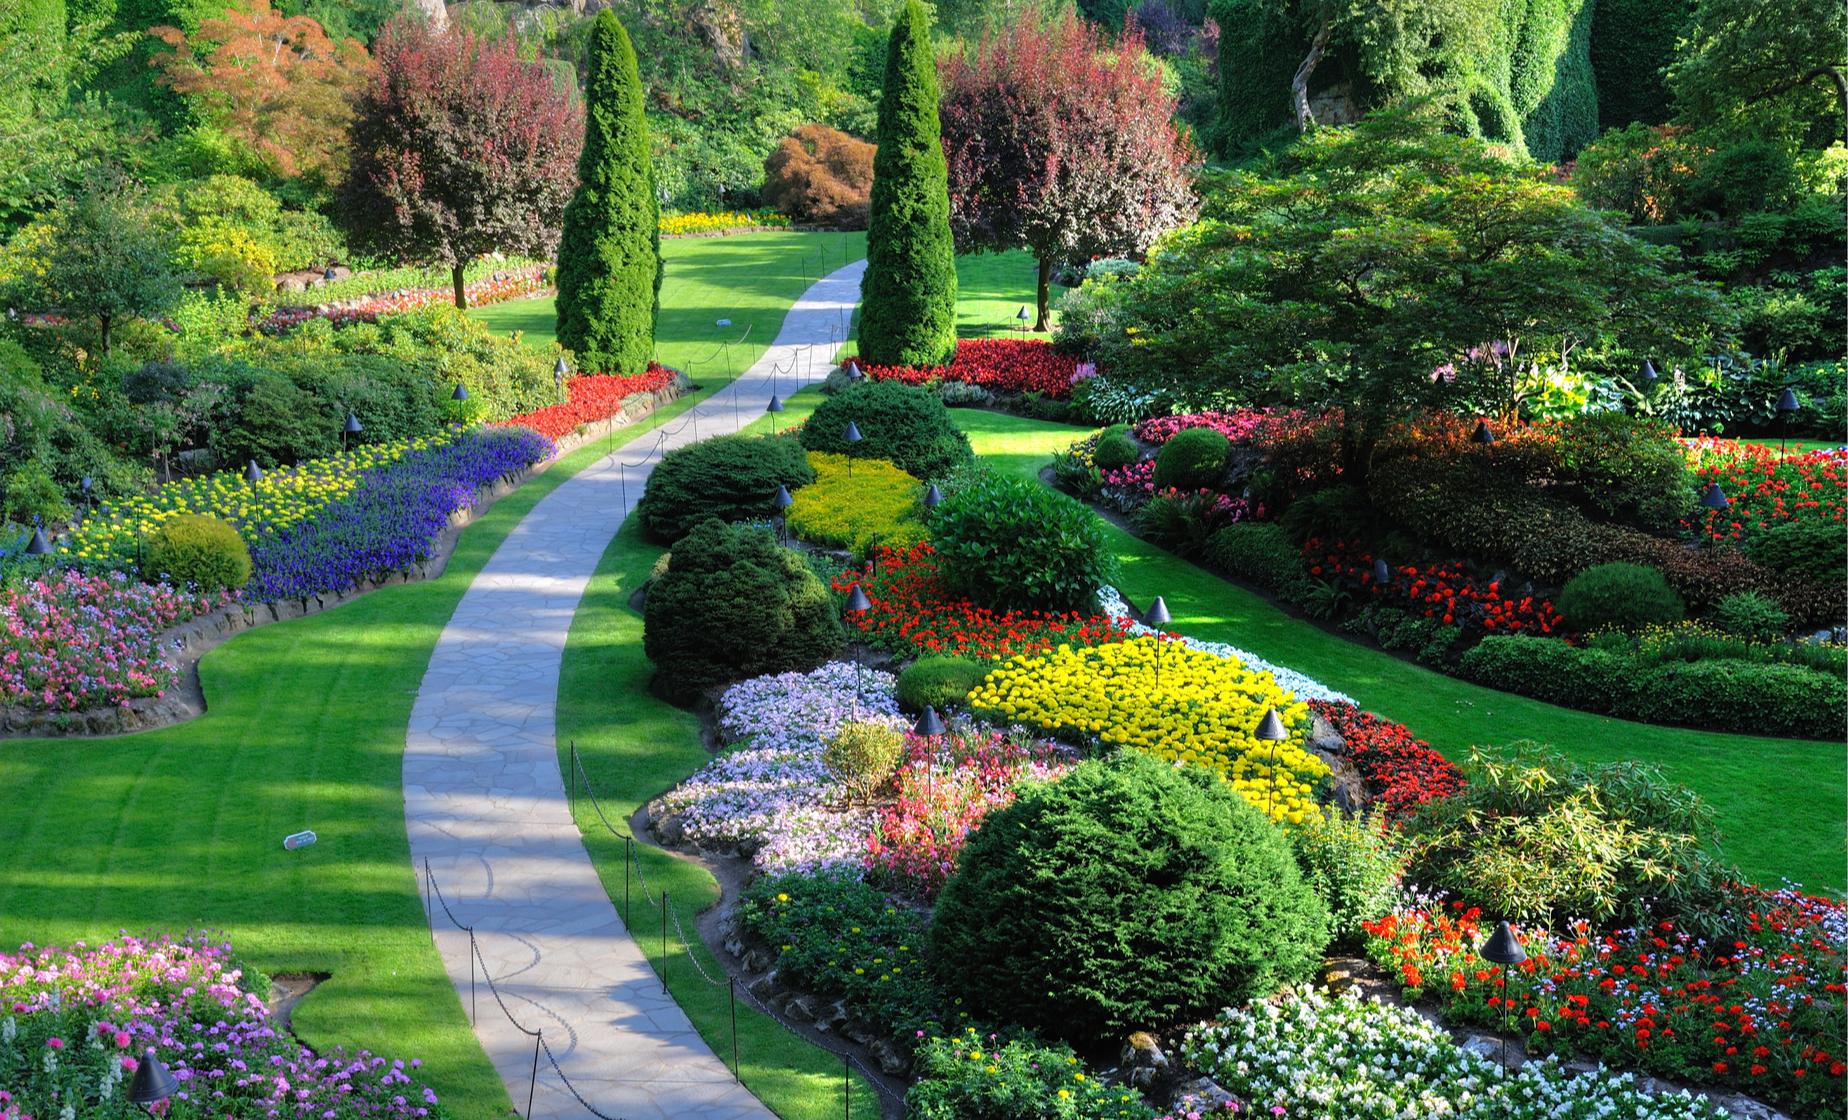 A Tale of Two Gardens - Butterfly & Butchart Gardens